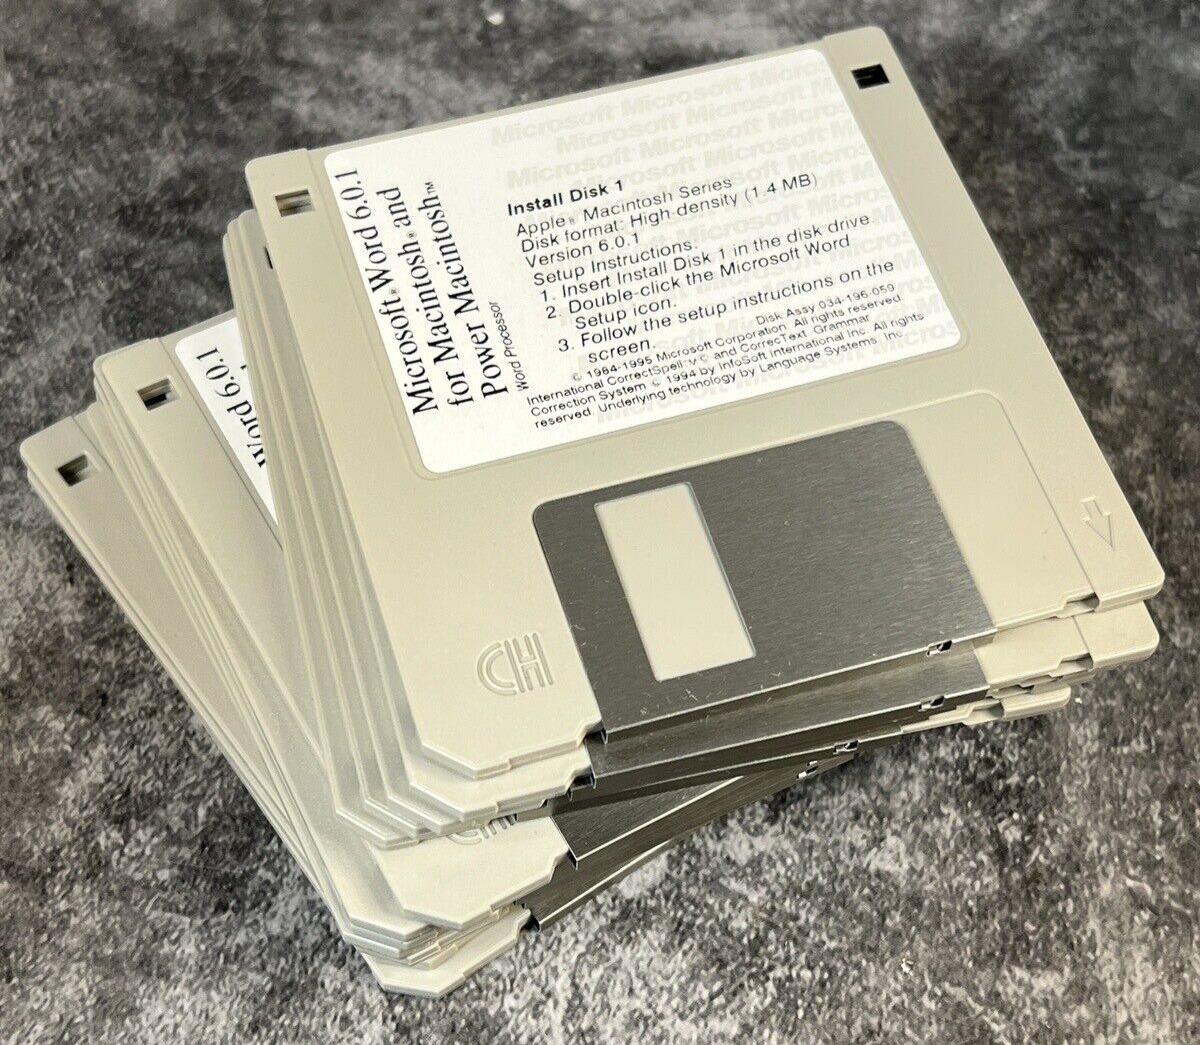 Microsoft Word Version 6.0.1 for the Macintosh and Power Mac, 13 Floppy Disks